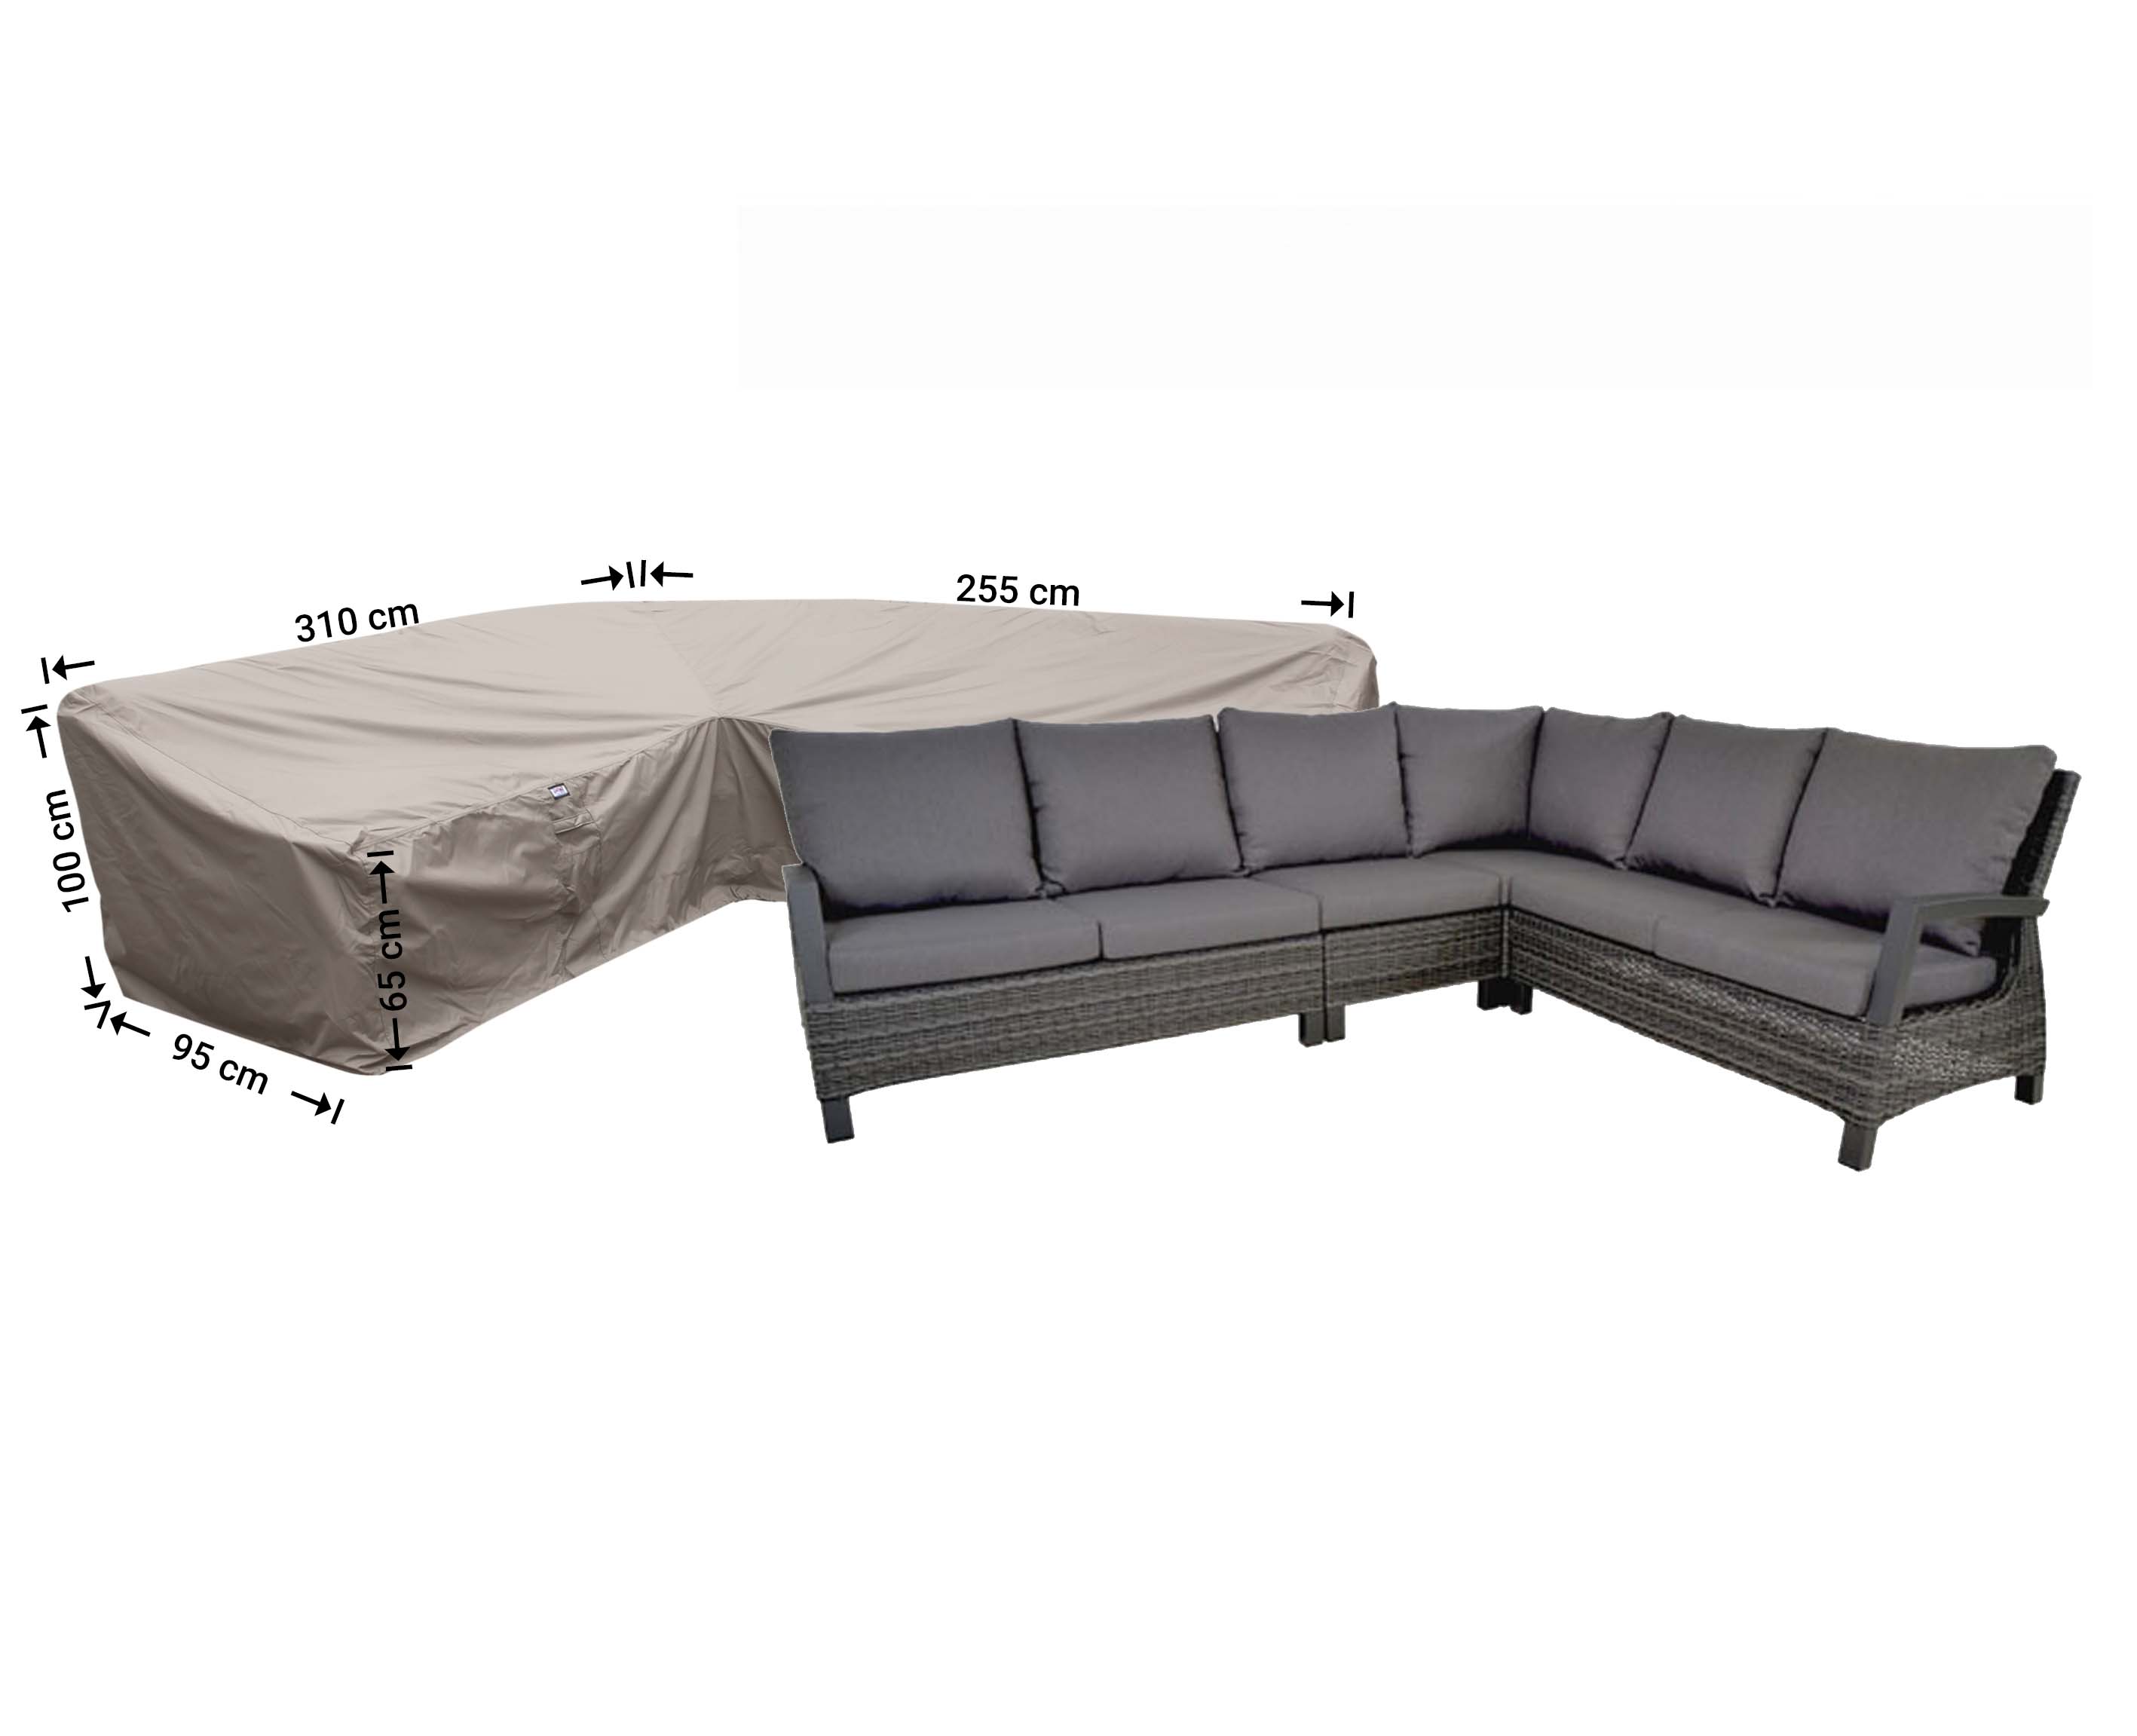 Cover for dining corner sofa 310 x 255 x 95, H: 100 / 65 cm